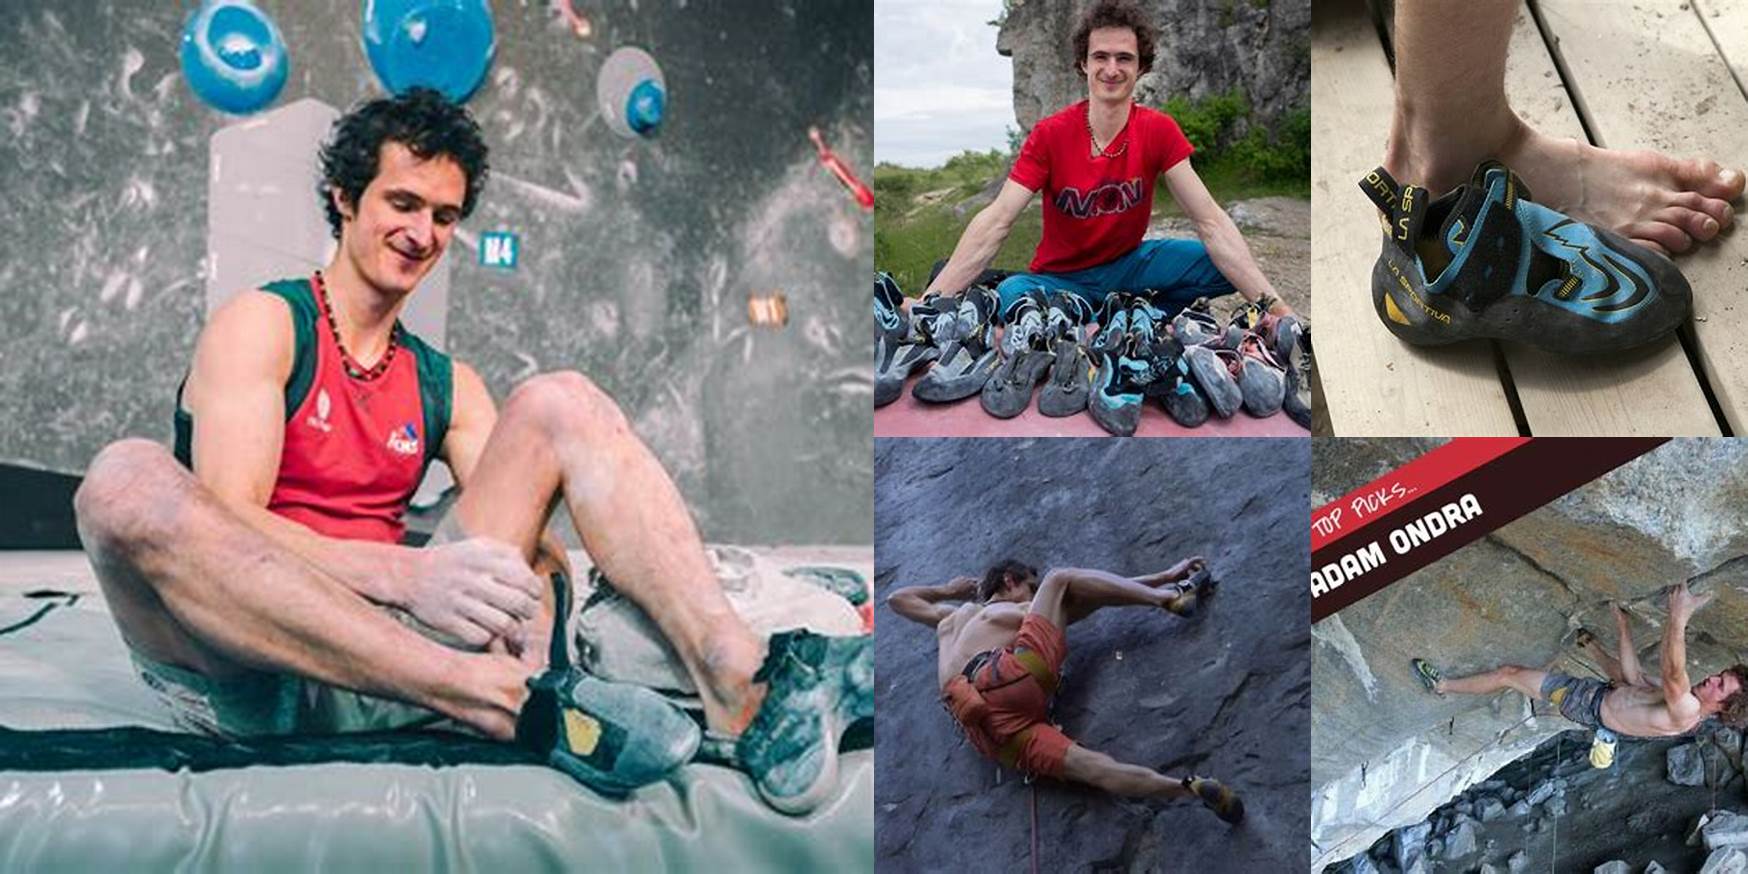 What Shoes Does Adam Ondra Wear